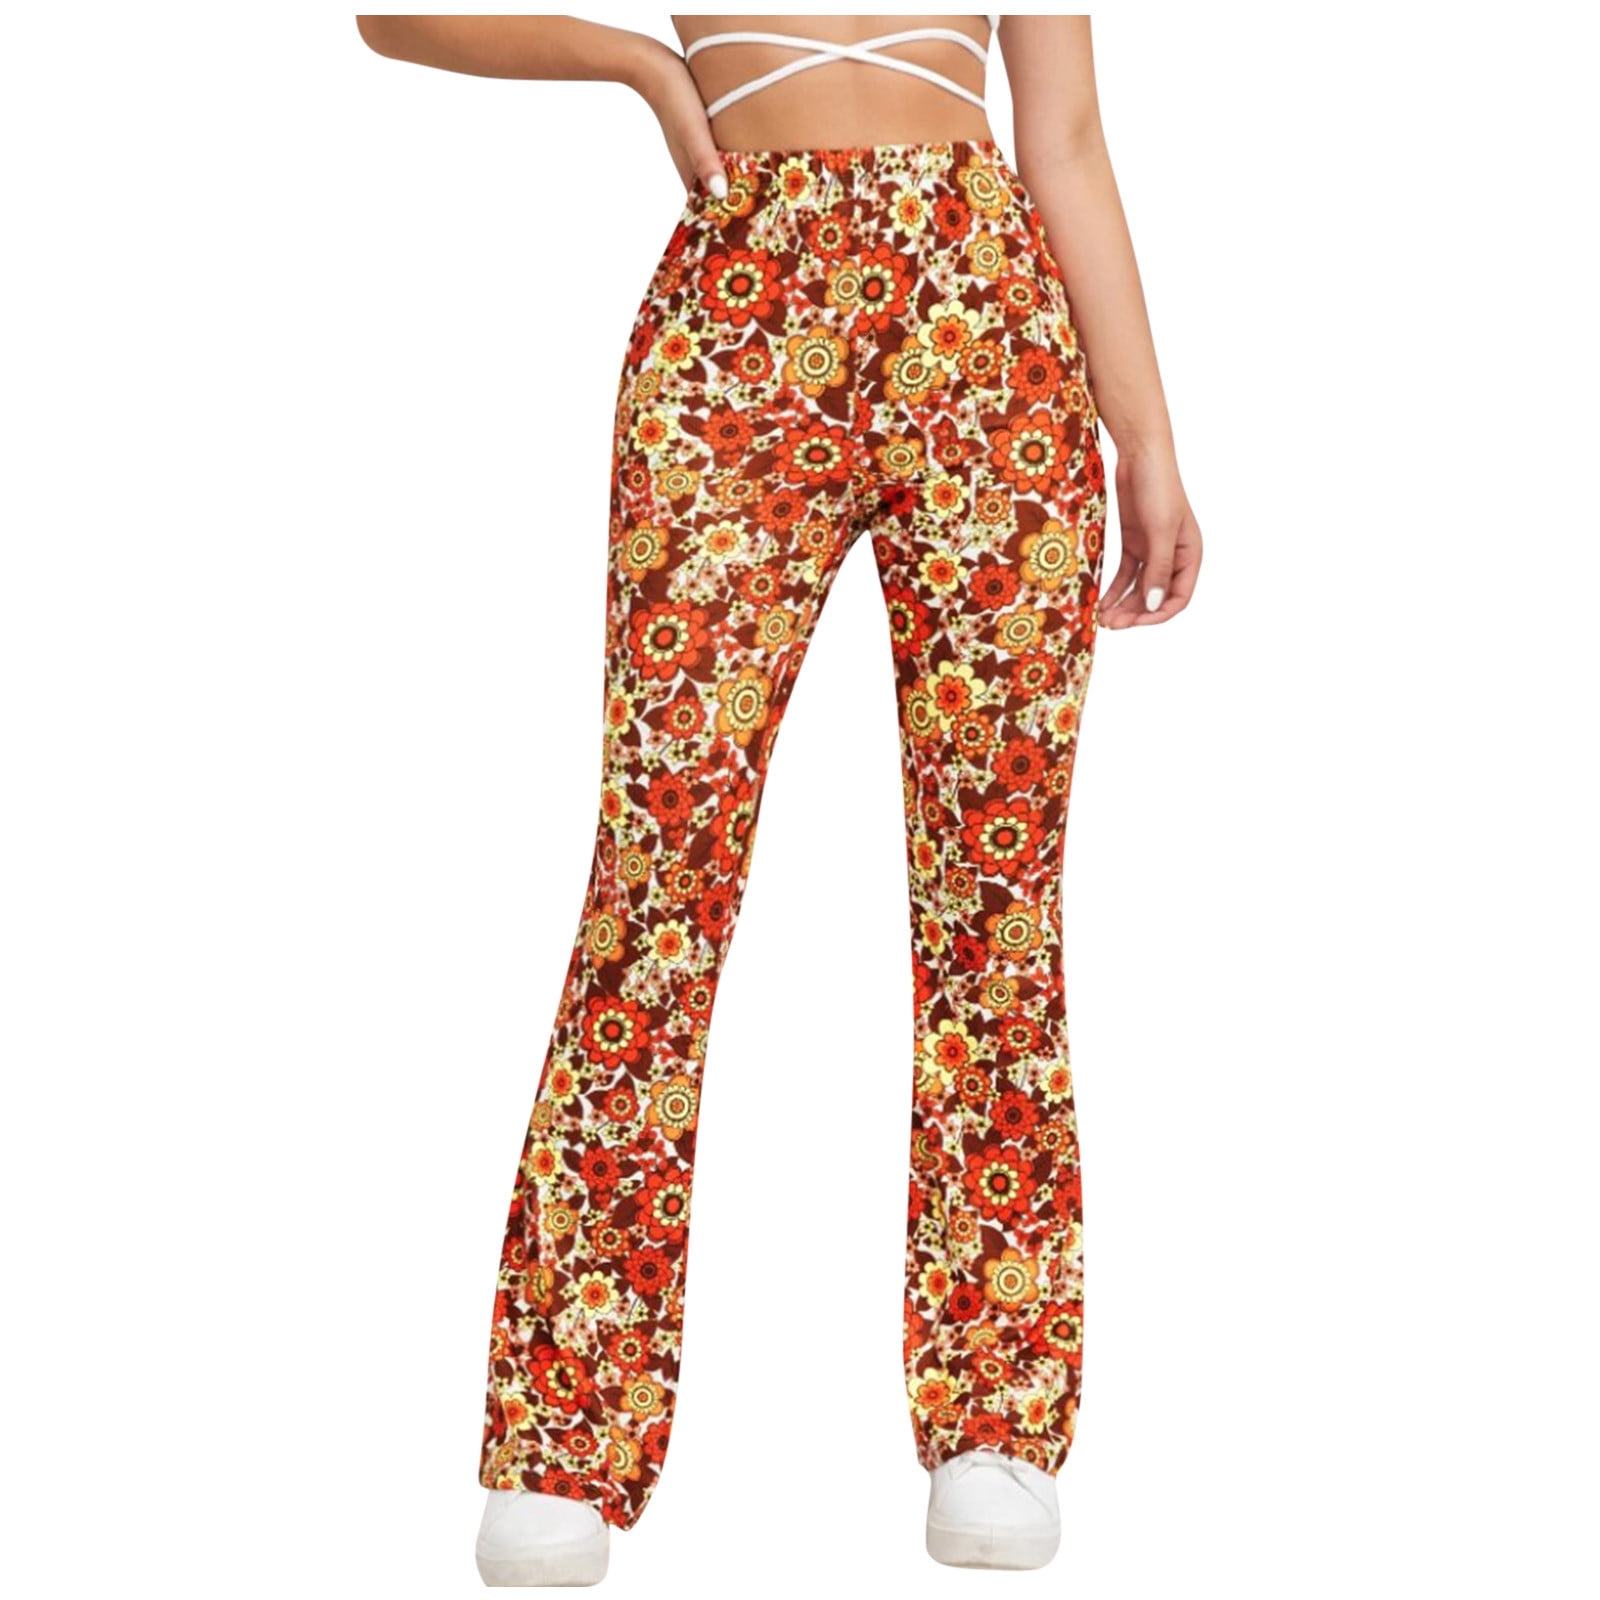 Women Bootcut Yoga Pants Printed High Waisted Stretchy Wide Leg Flare Pants  Lightweight Soft Comfy Bell Bottom Lounge Pants Trousers 